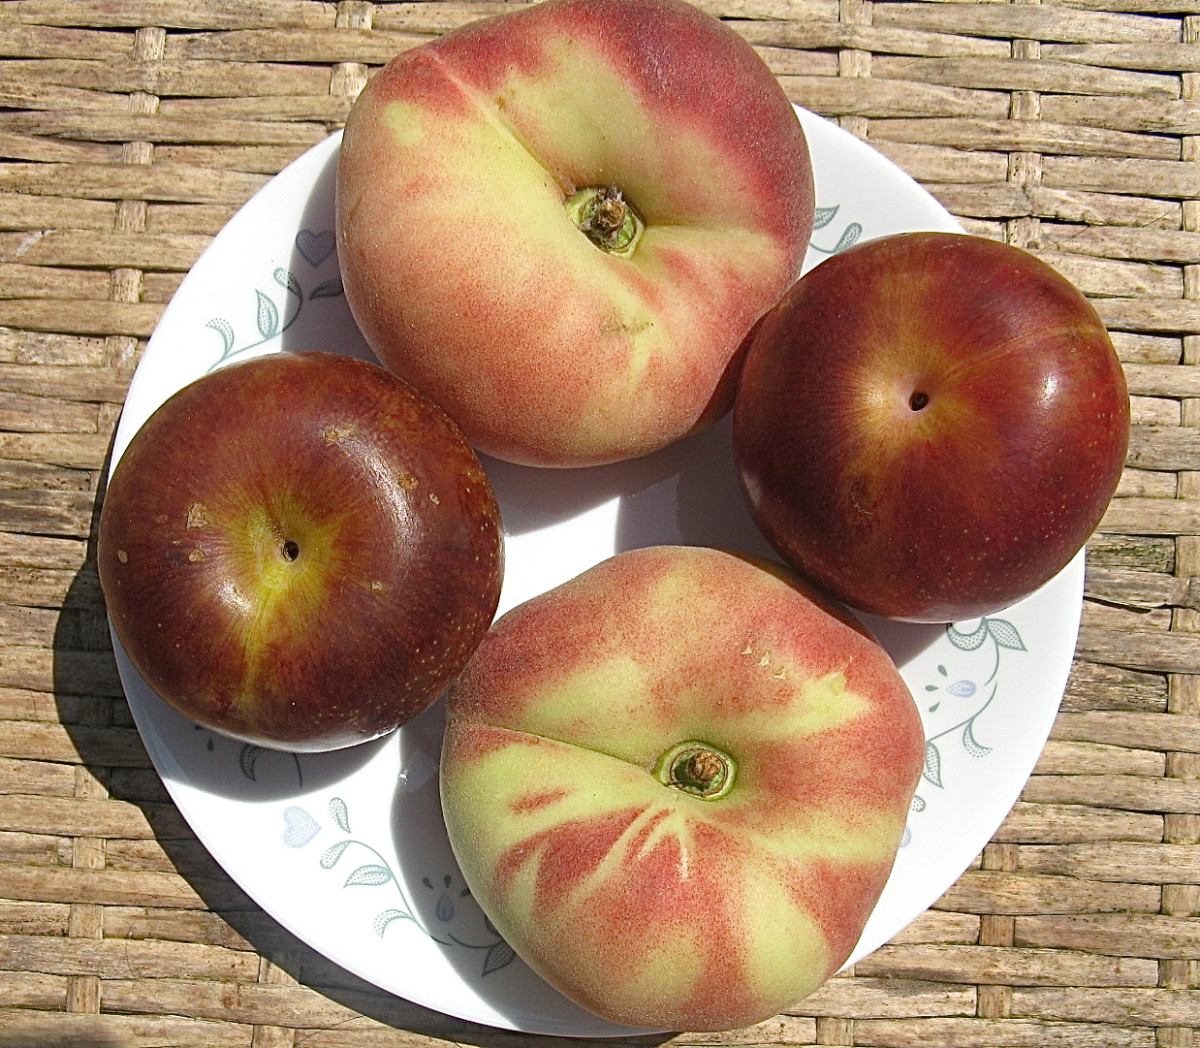 Fruits such as peaches and pluots contain beneficial phytonutrients, especially when eaten with their skins.